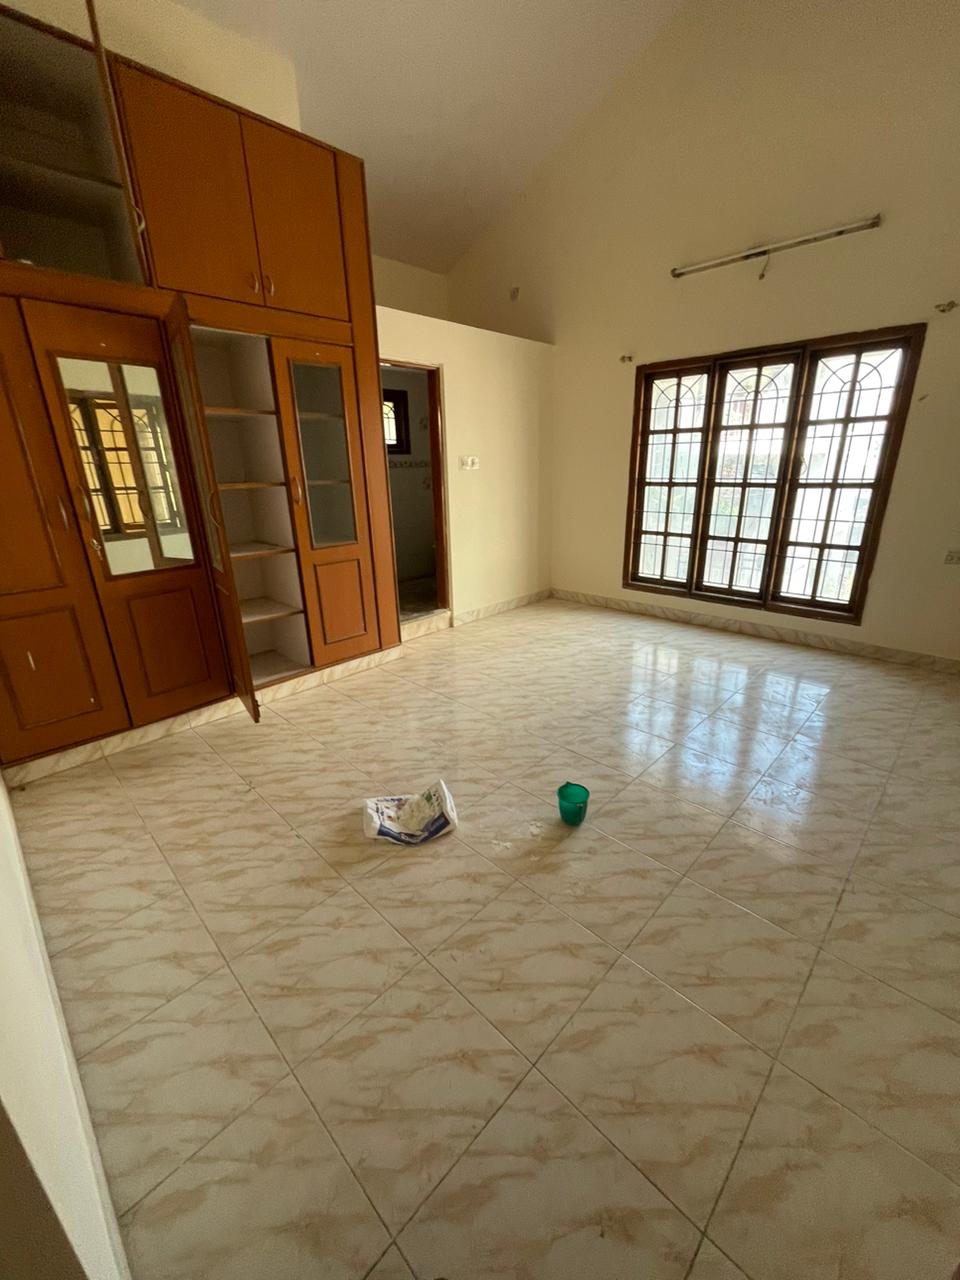 2 BHK Independent House for Lease Only at JAML2 - 2324 in Dr. Ambedkar Veedhi